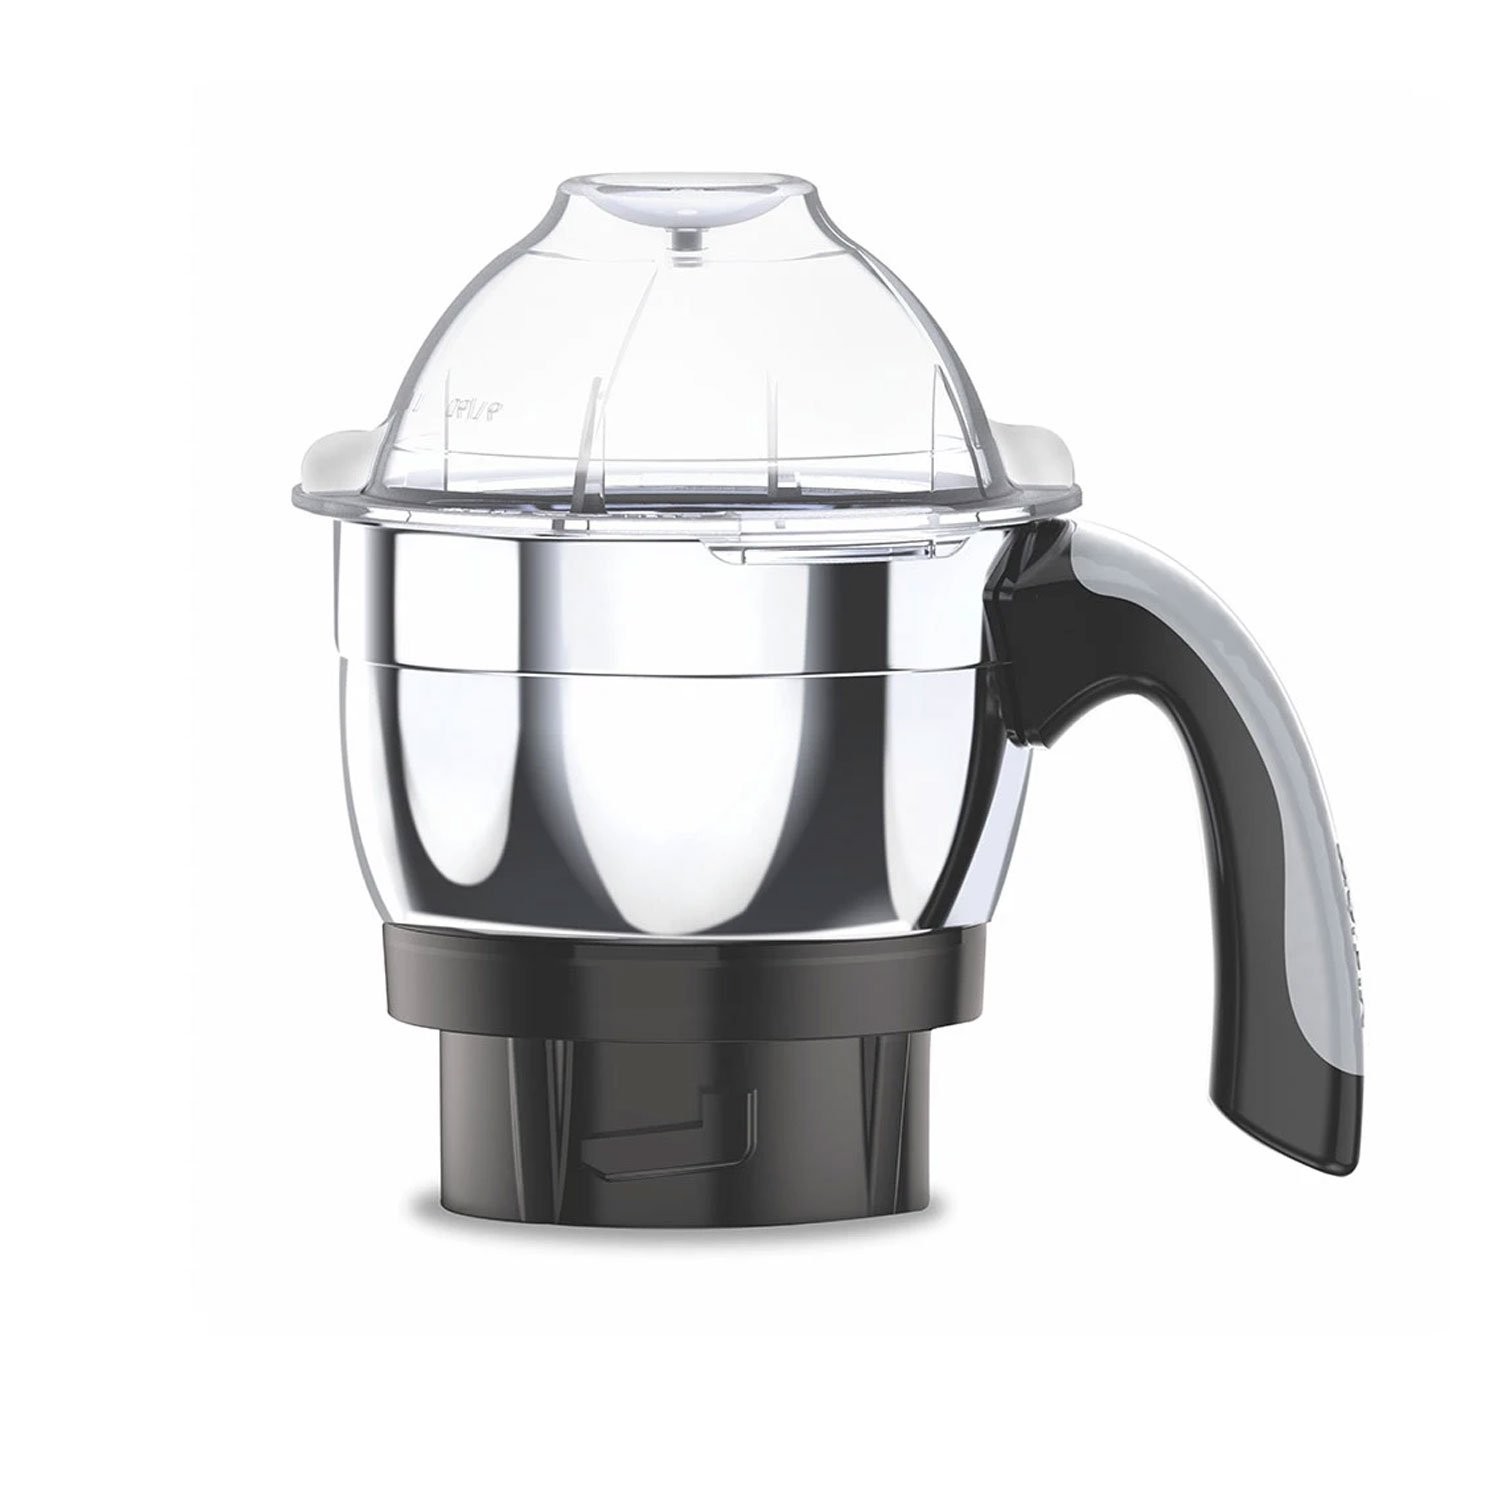 vidiem-eva-nero-650w-stainless-steel-jars-indian-mixer-grinder-spice-coffee-grinder-110v-for-use-in-canada-usa